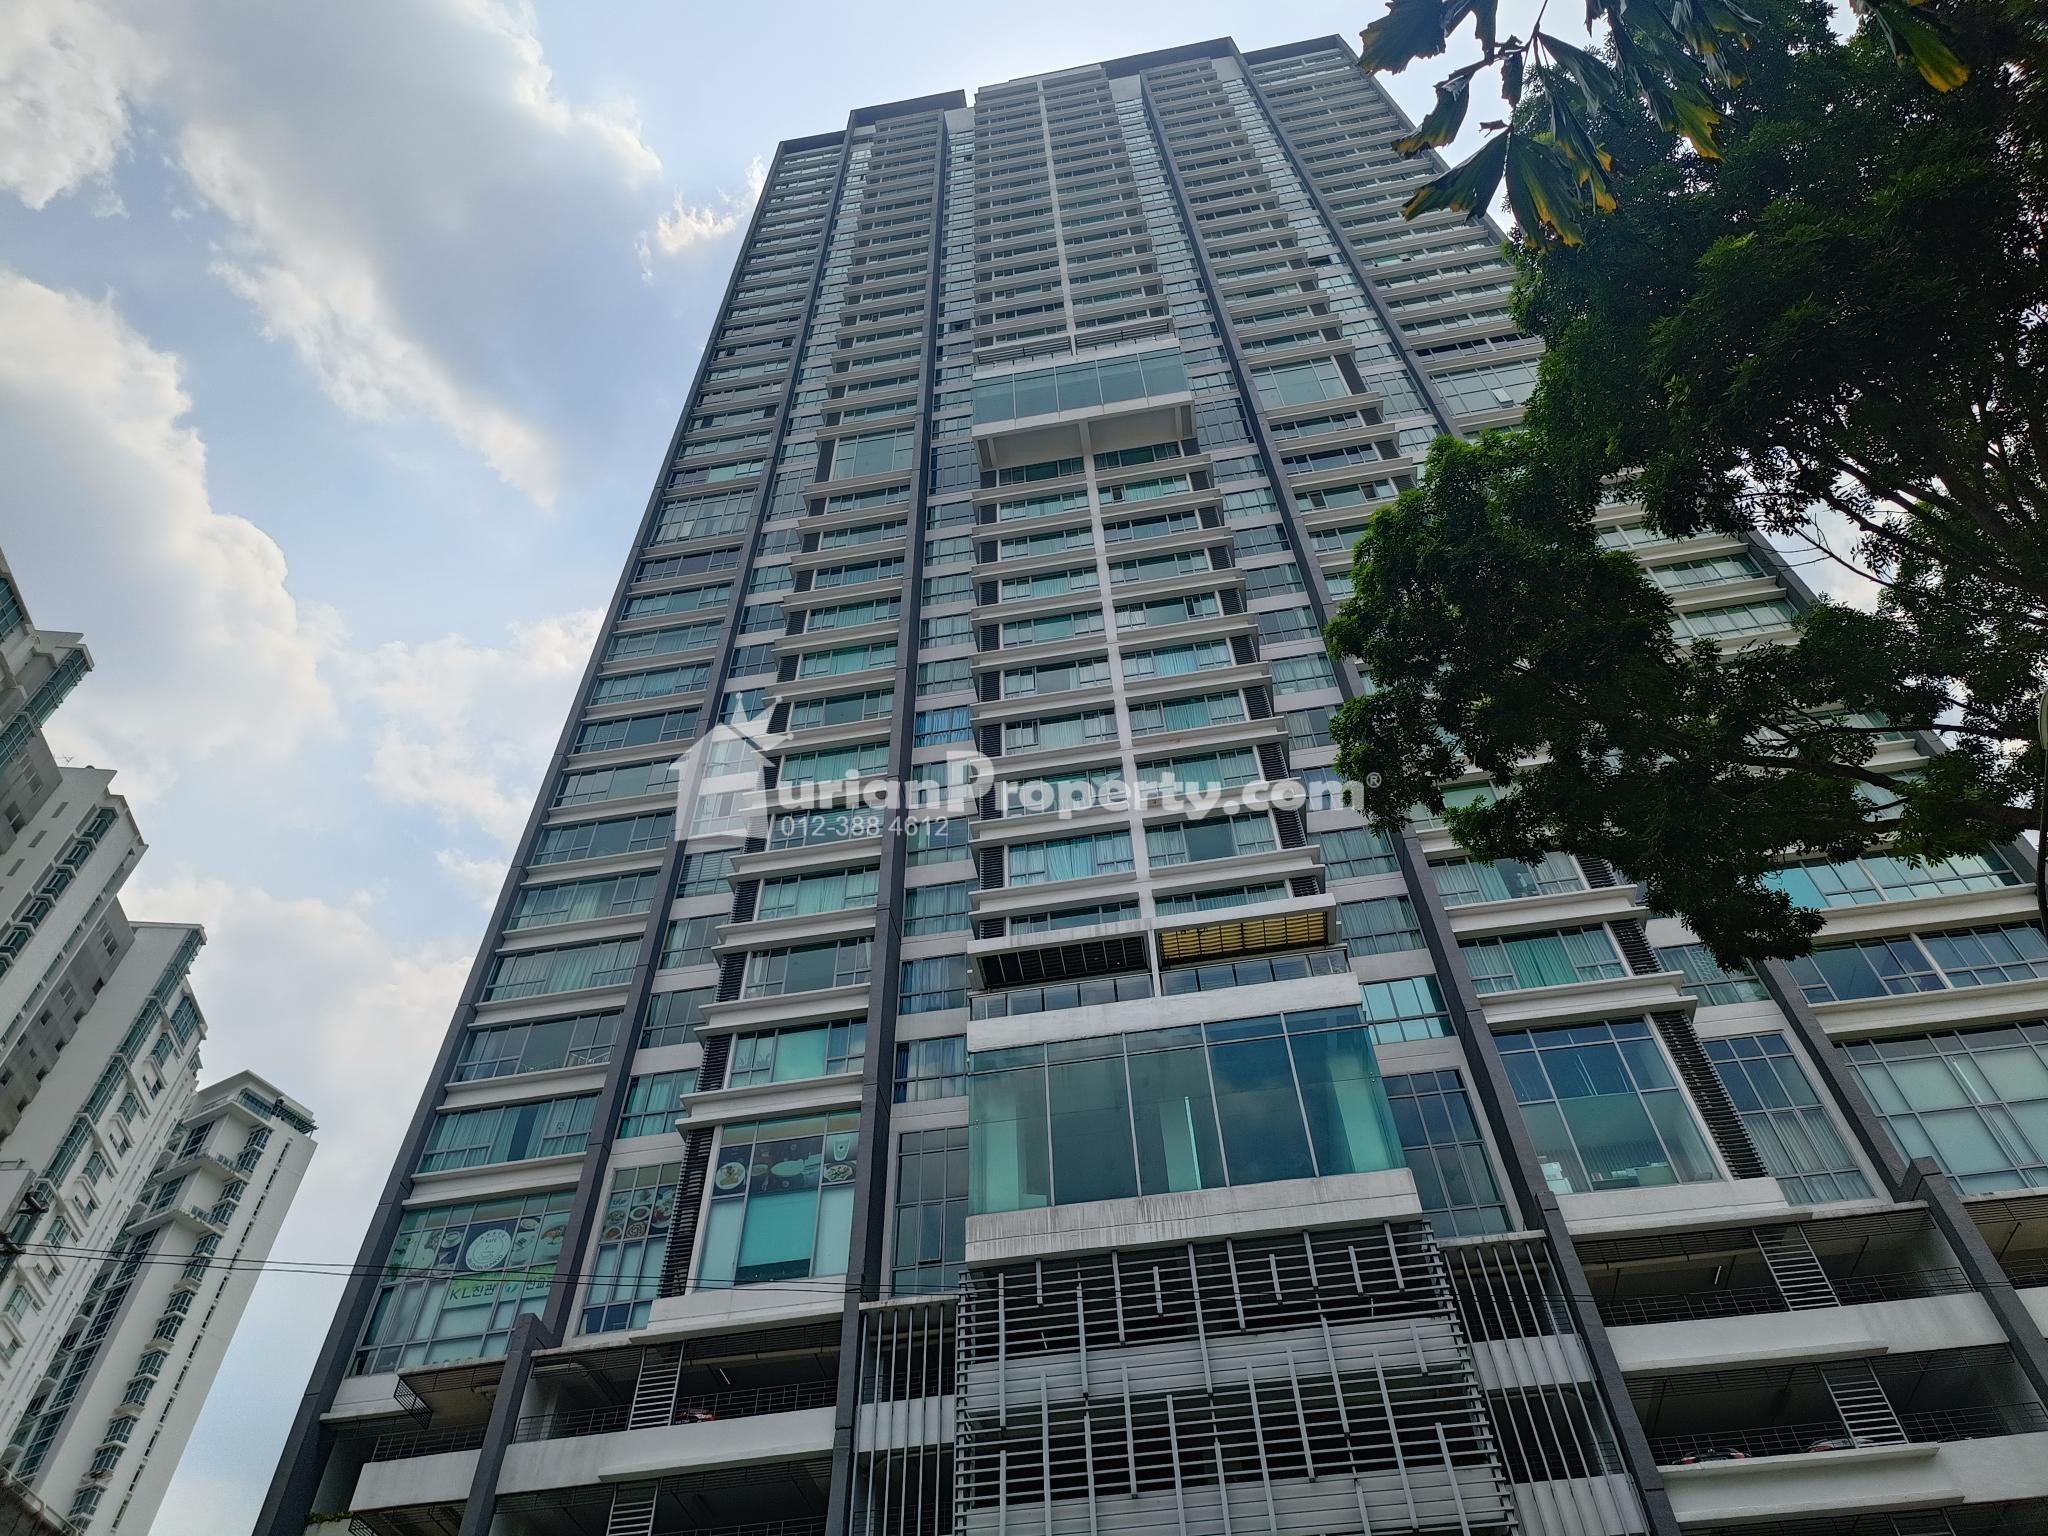 Serviced Residence For Sale at Gateway Kiaramas